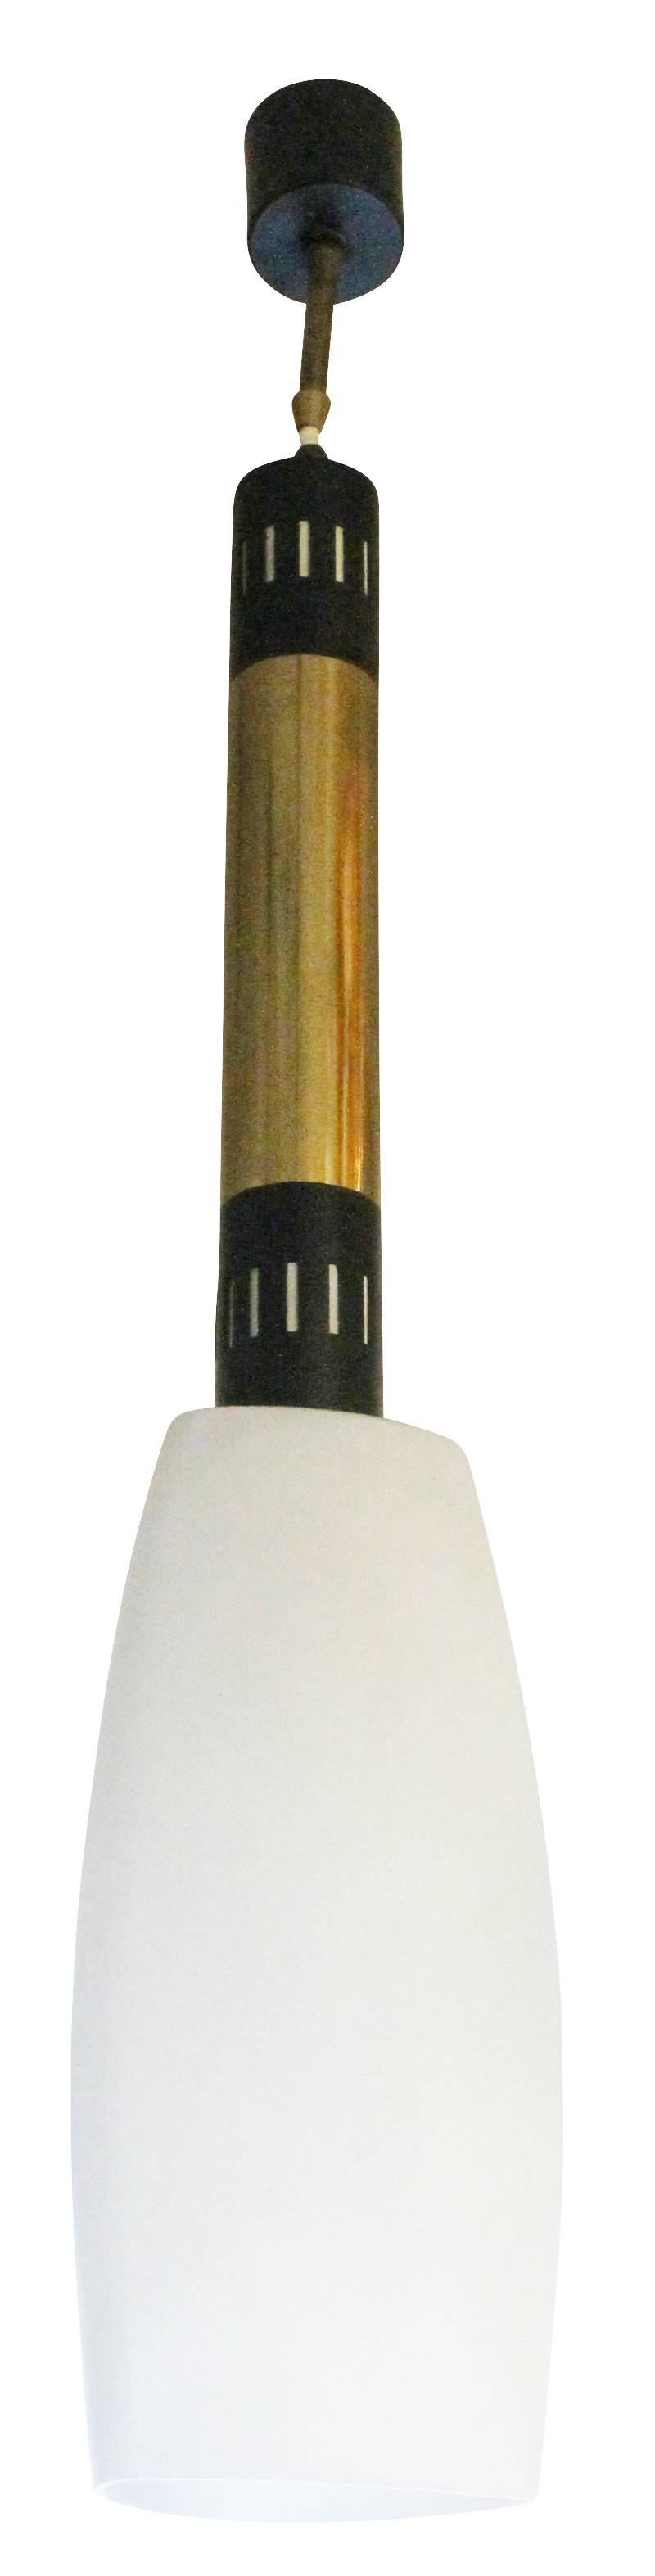 Single Stilnovo pendant with a triangular frosted glass shade and black and brass body. Height can be easily adjusted by lengthening or shortening the electrical wire. Holds one regular socket.
